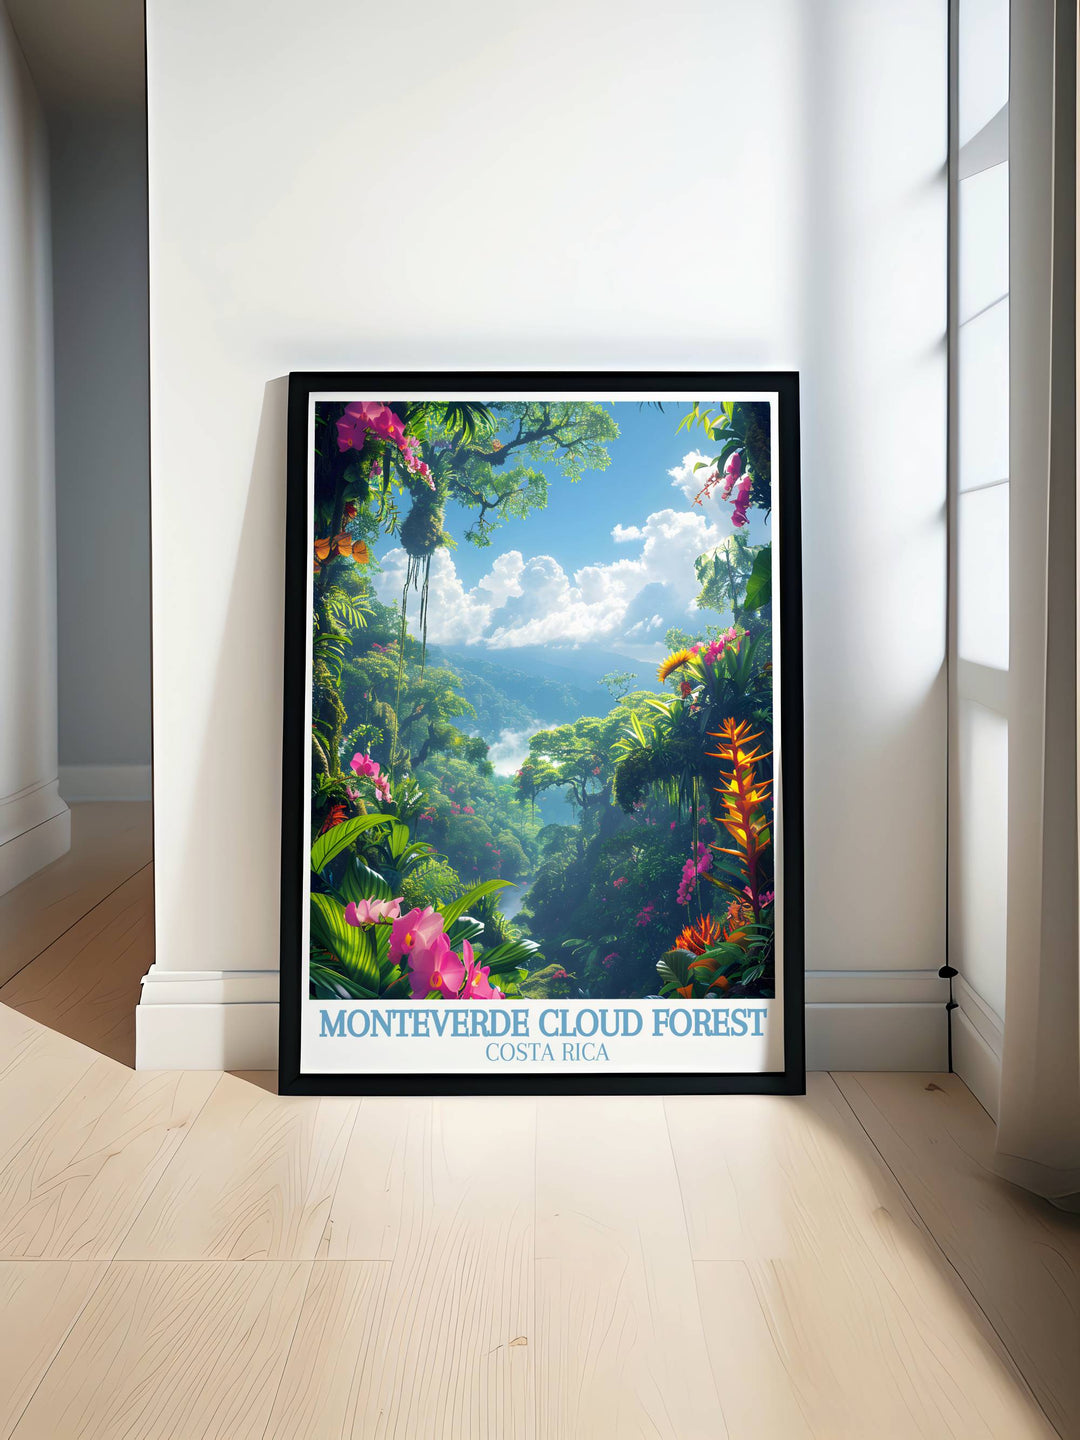 Fine art print of Monteverde Cloud Forest showcasing the dense foliage and vibrant wildlife, perfect for nature enthusiasts.